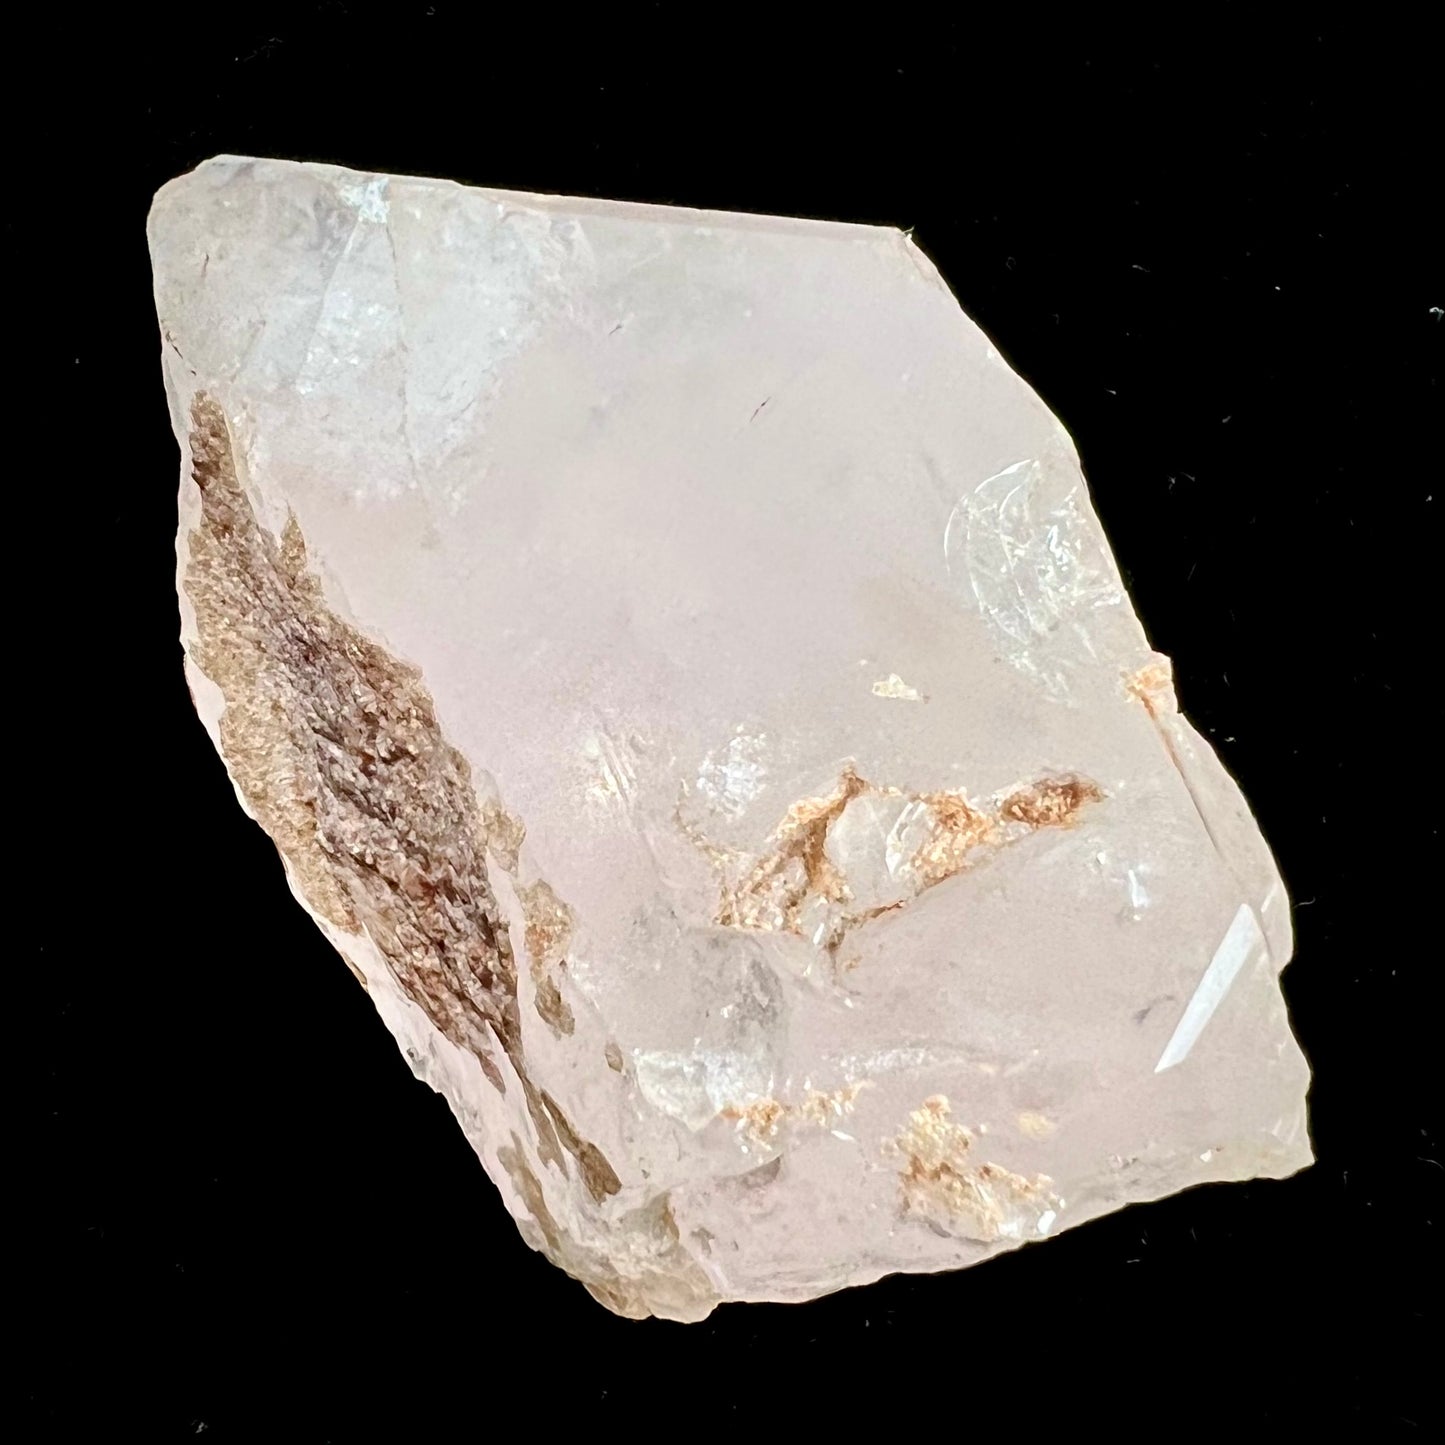 A rough, pink morganite crystal from the Stewart Mine in Pala, California.